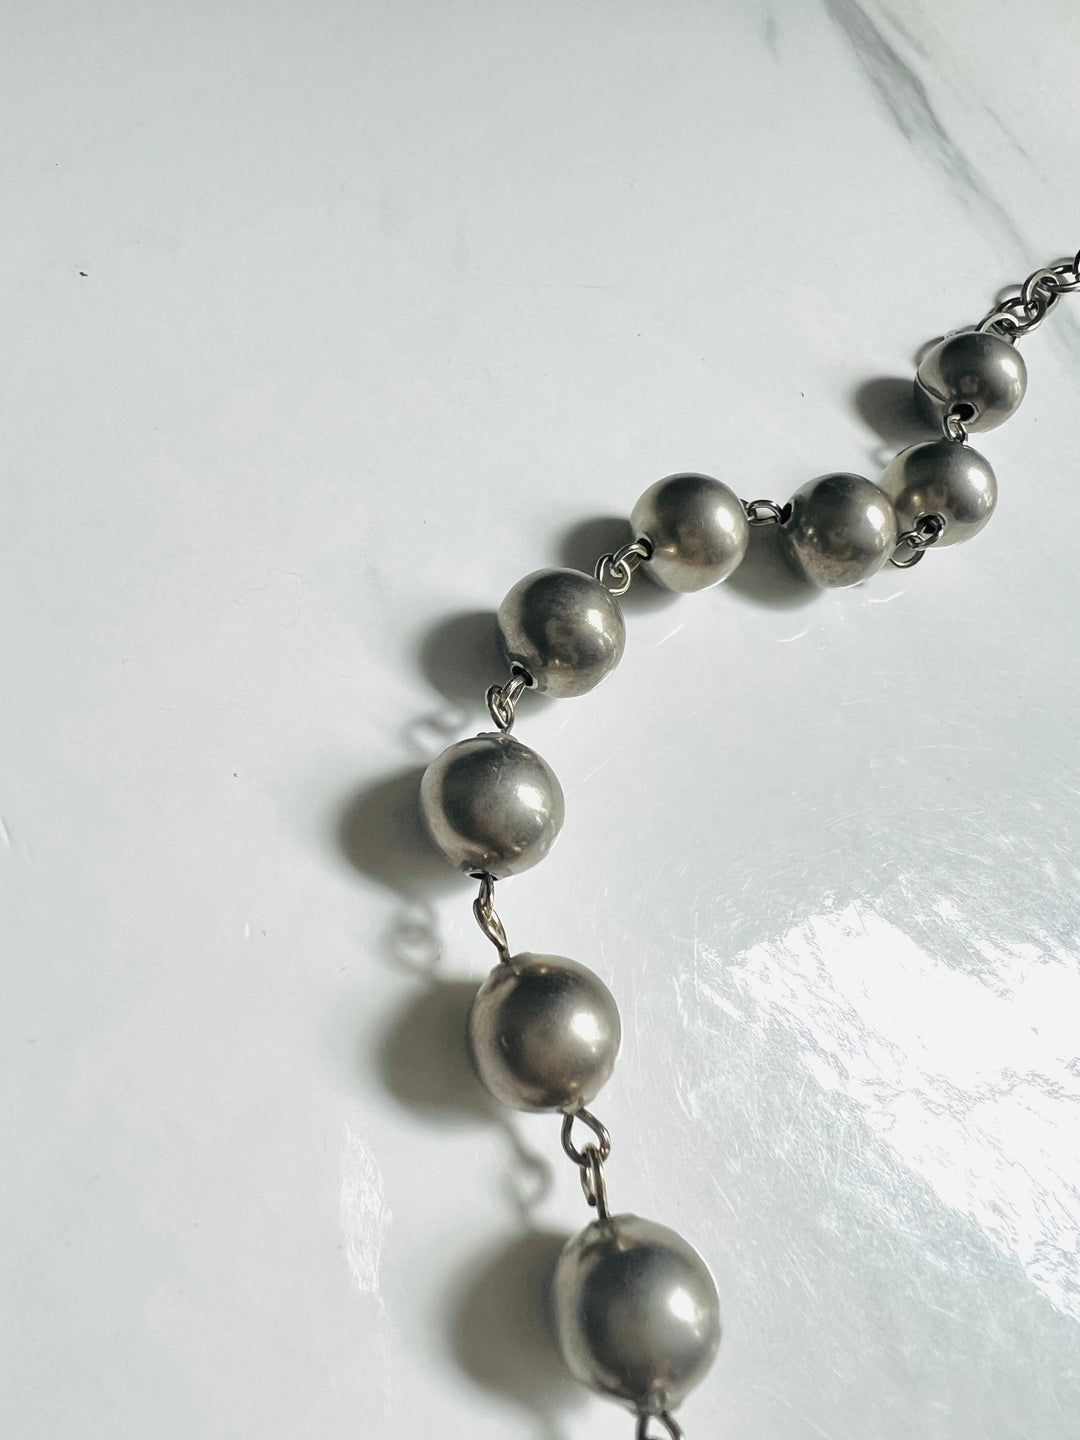 Large Antique Silver Beaded Ball Chain Necklace